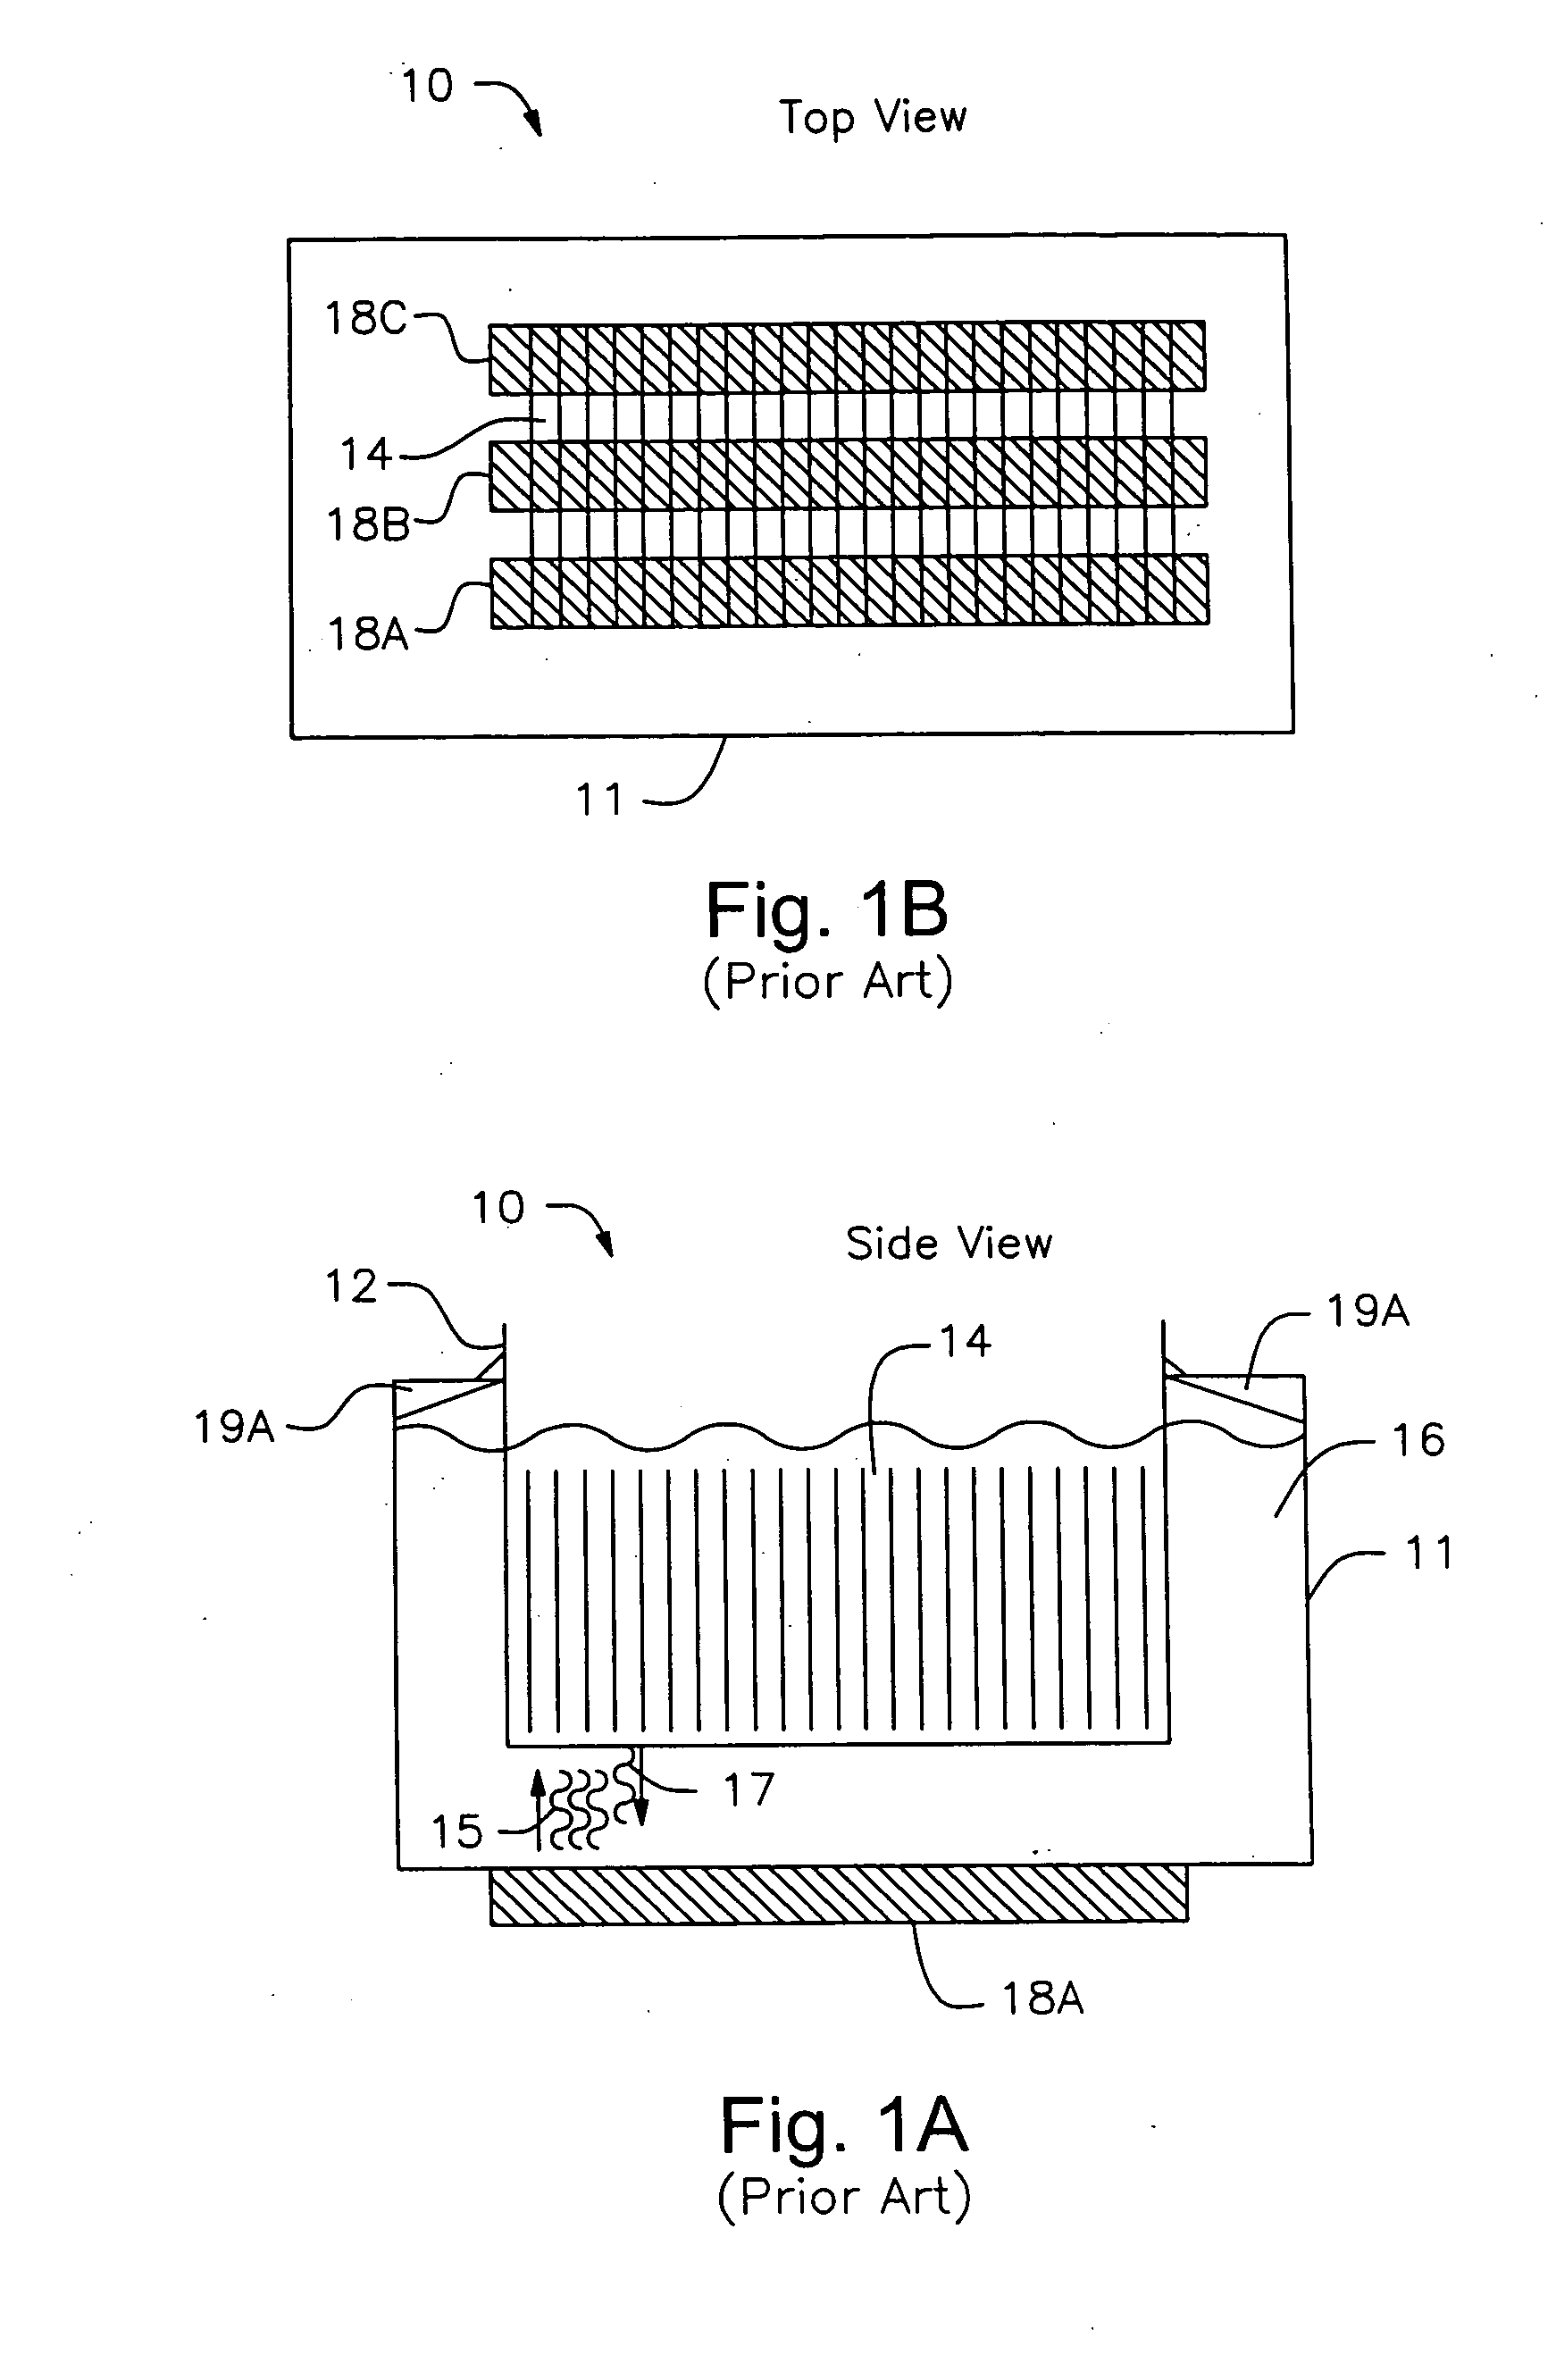 Megasonic cleaning efficiency using auto-tuning of a RF generator at constant maximum efficiency